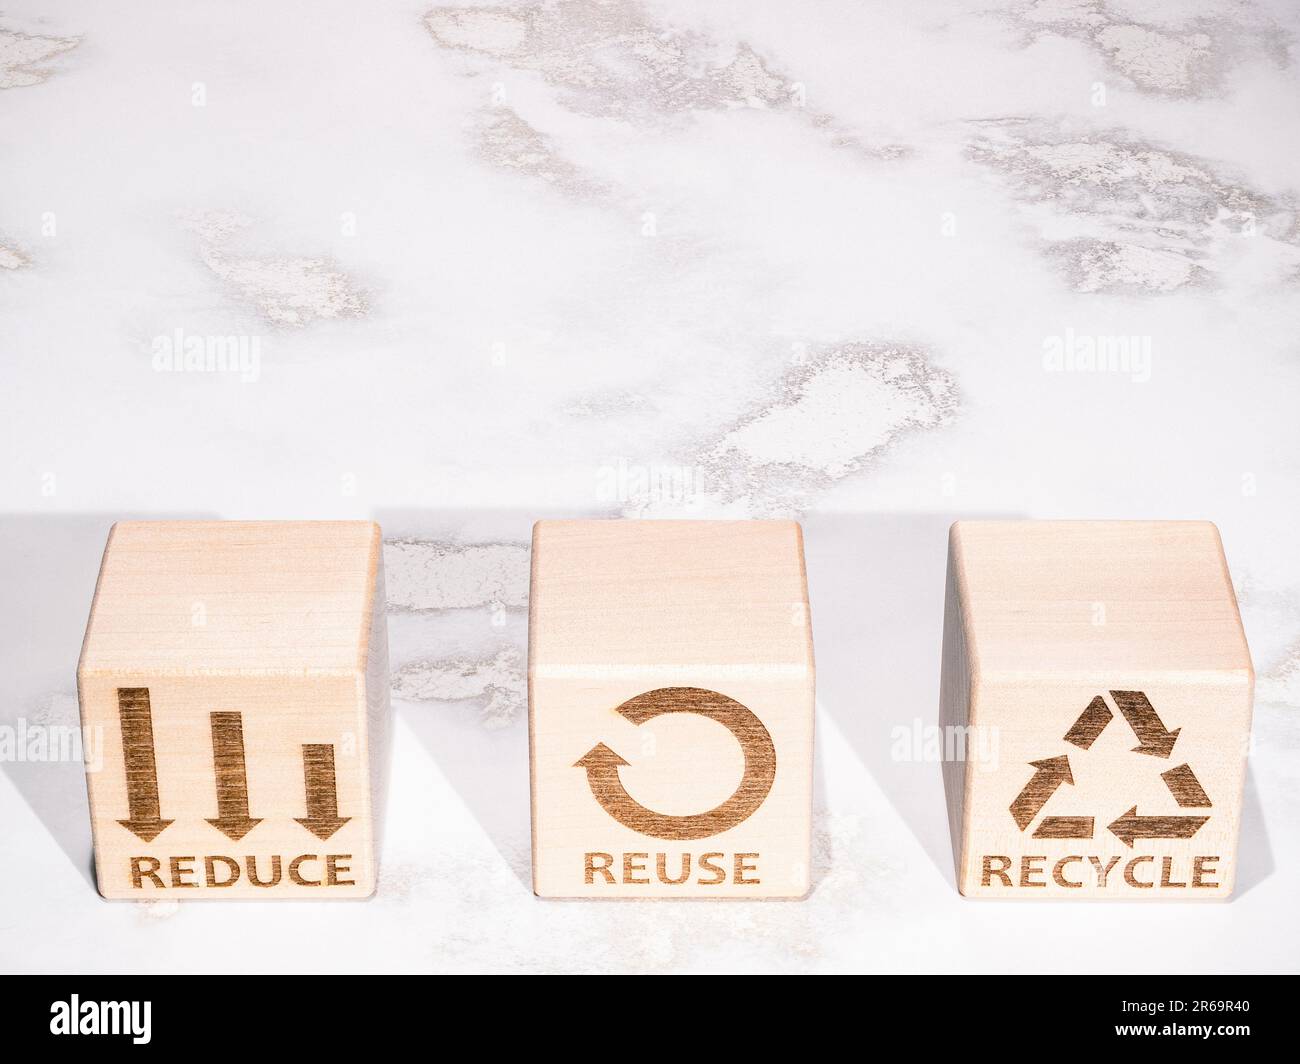 Reduce, Reuse, and Recycle resources concept symbols Stock Photo